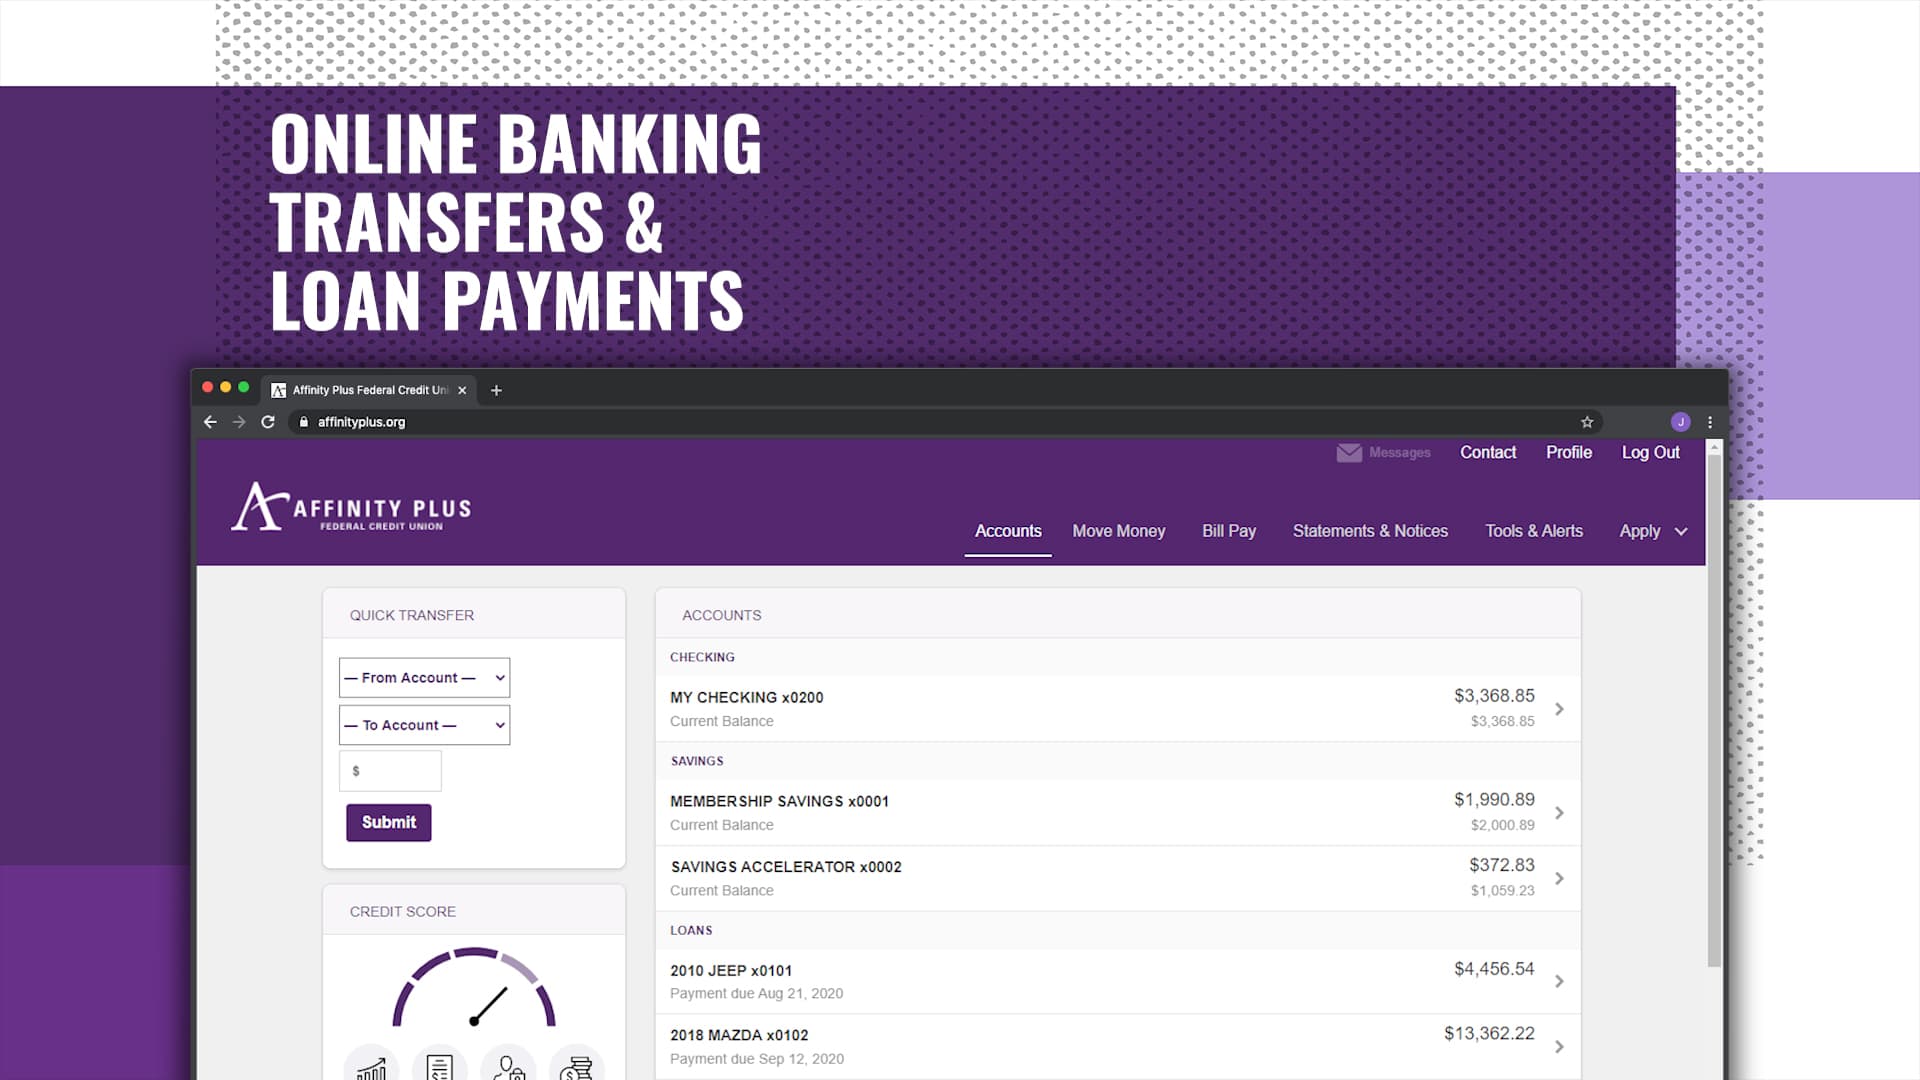 Online Banking – Transfers & Loan Payments